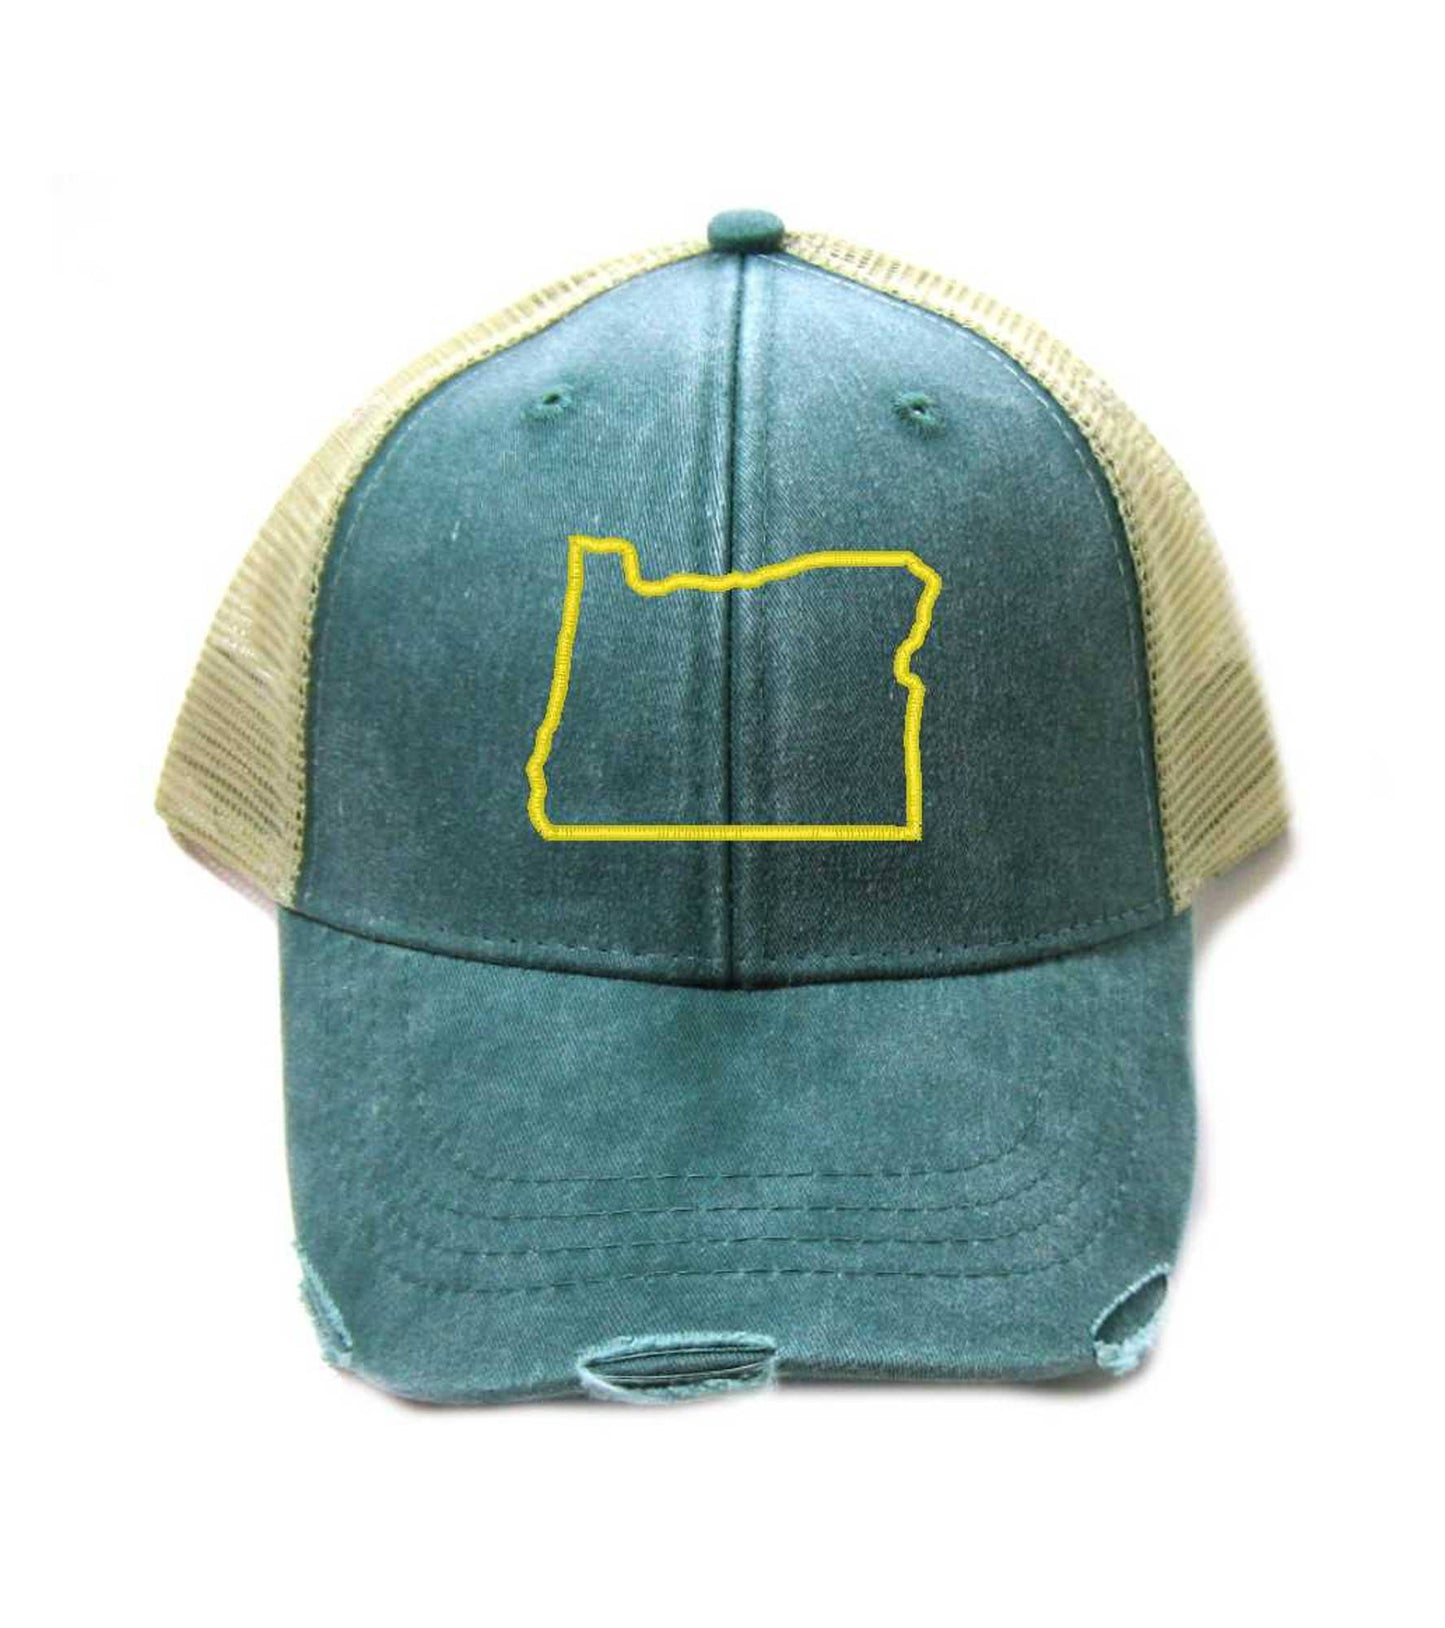 Oregon Hat - Distressed Snapback Trucker Hat - Oregon State Outline - Many Colors Available